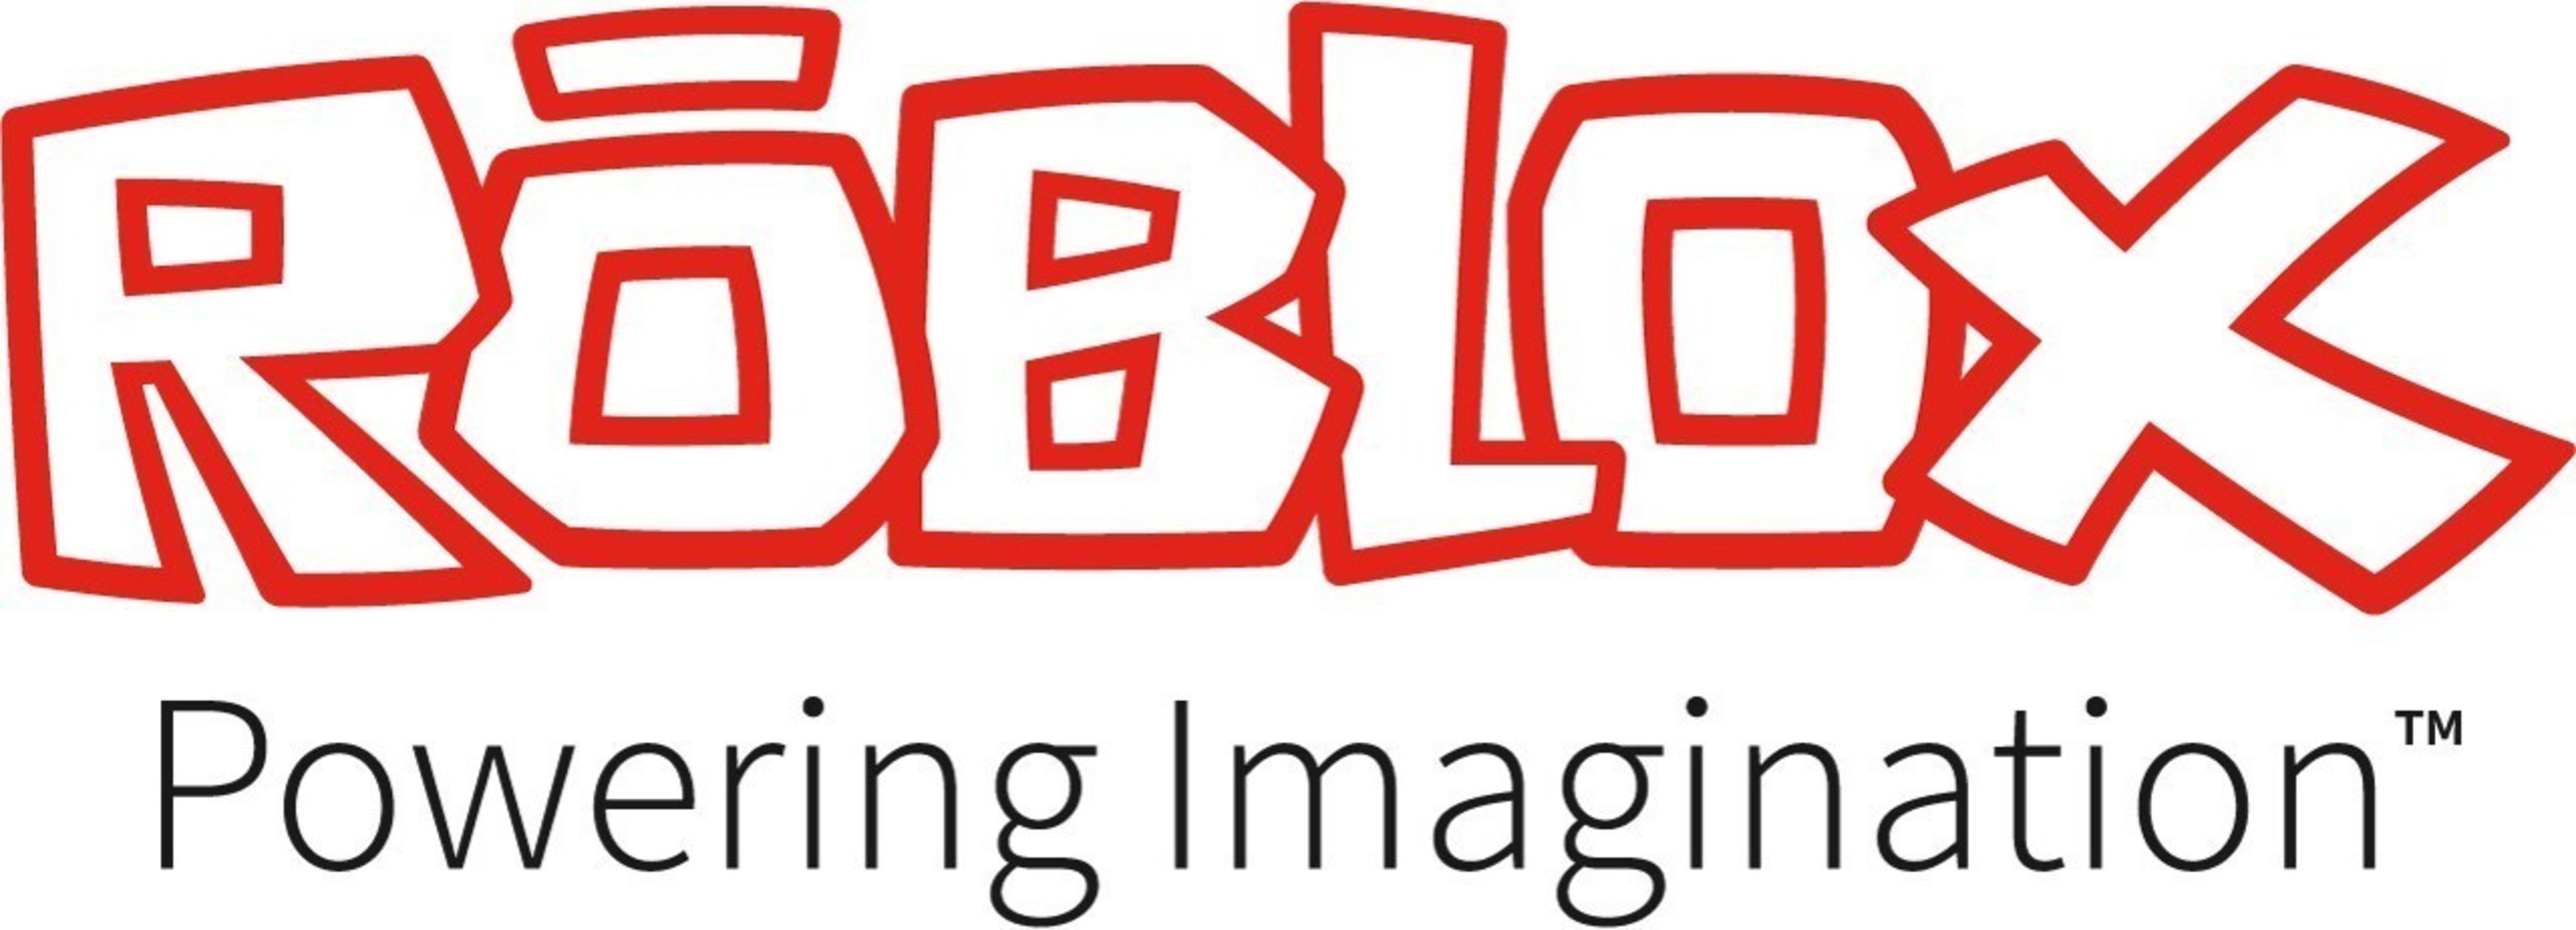 Roblox Expands Powering Imagination Vision By Launching - roblox vr mobile